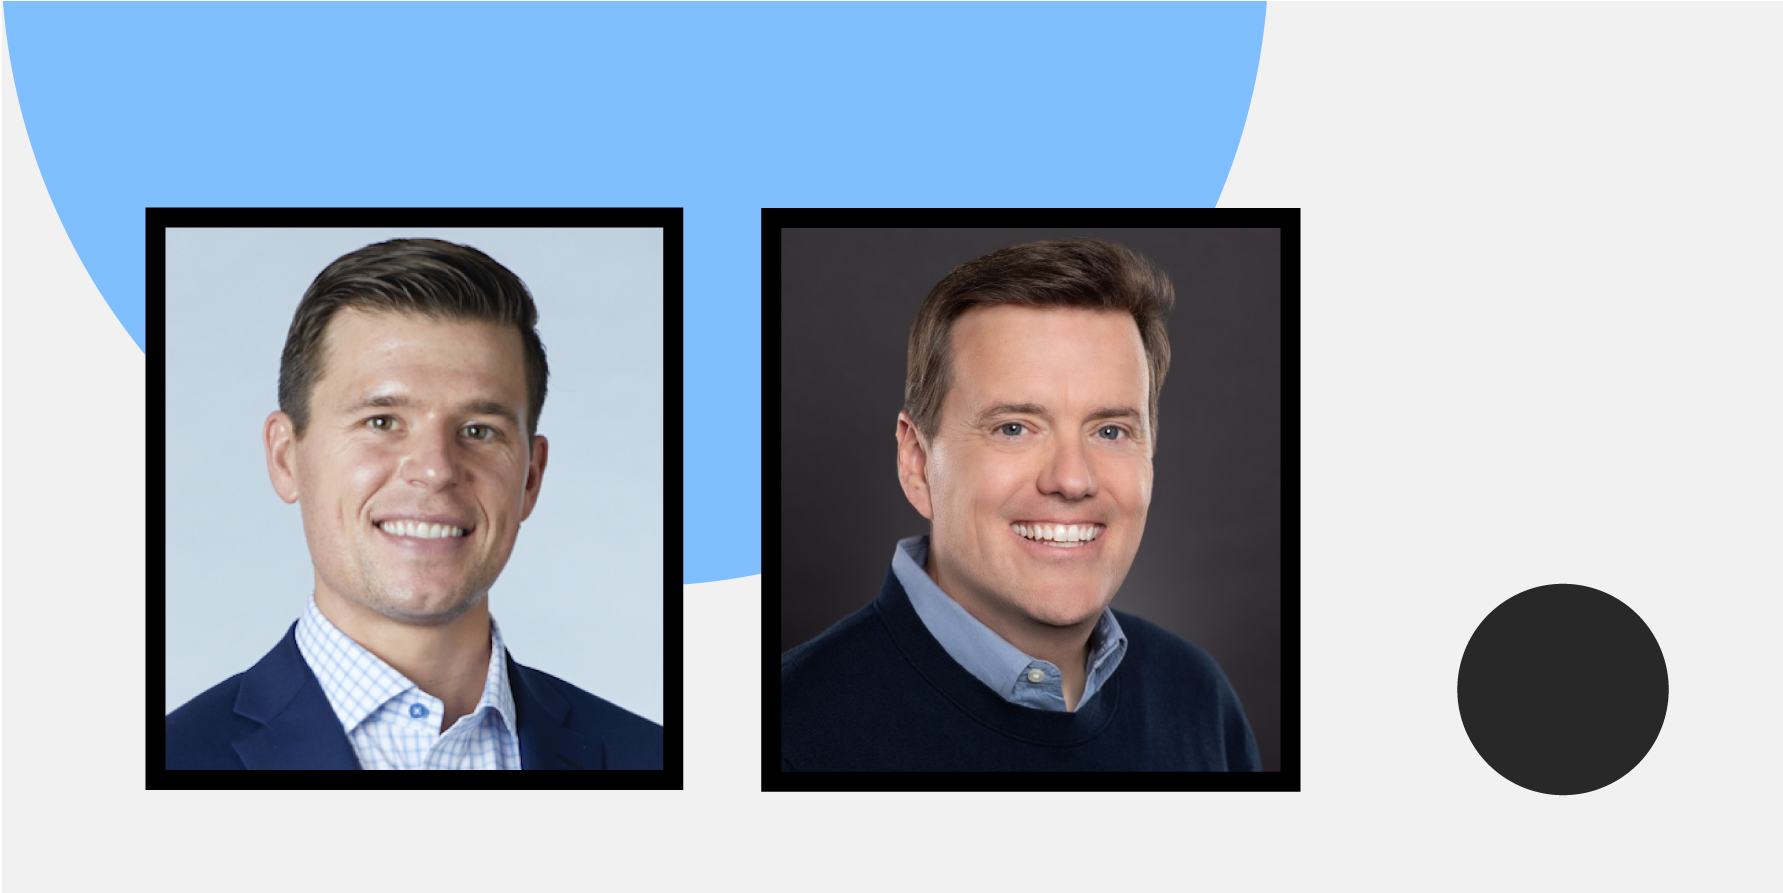 Headshot photographs of Kyle Coleman, VP of Revenue Growth & Enablement at Clari, and David Dulany, founder and CEO of Tenbound for The Sales Development Podcast